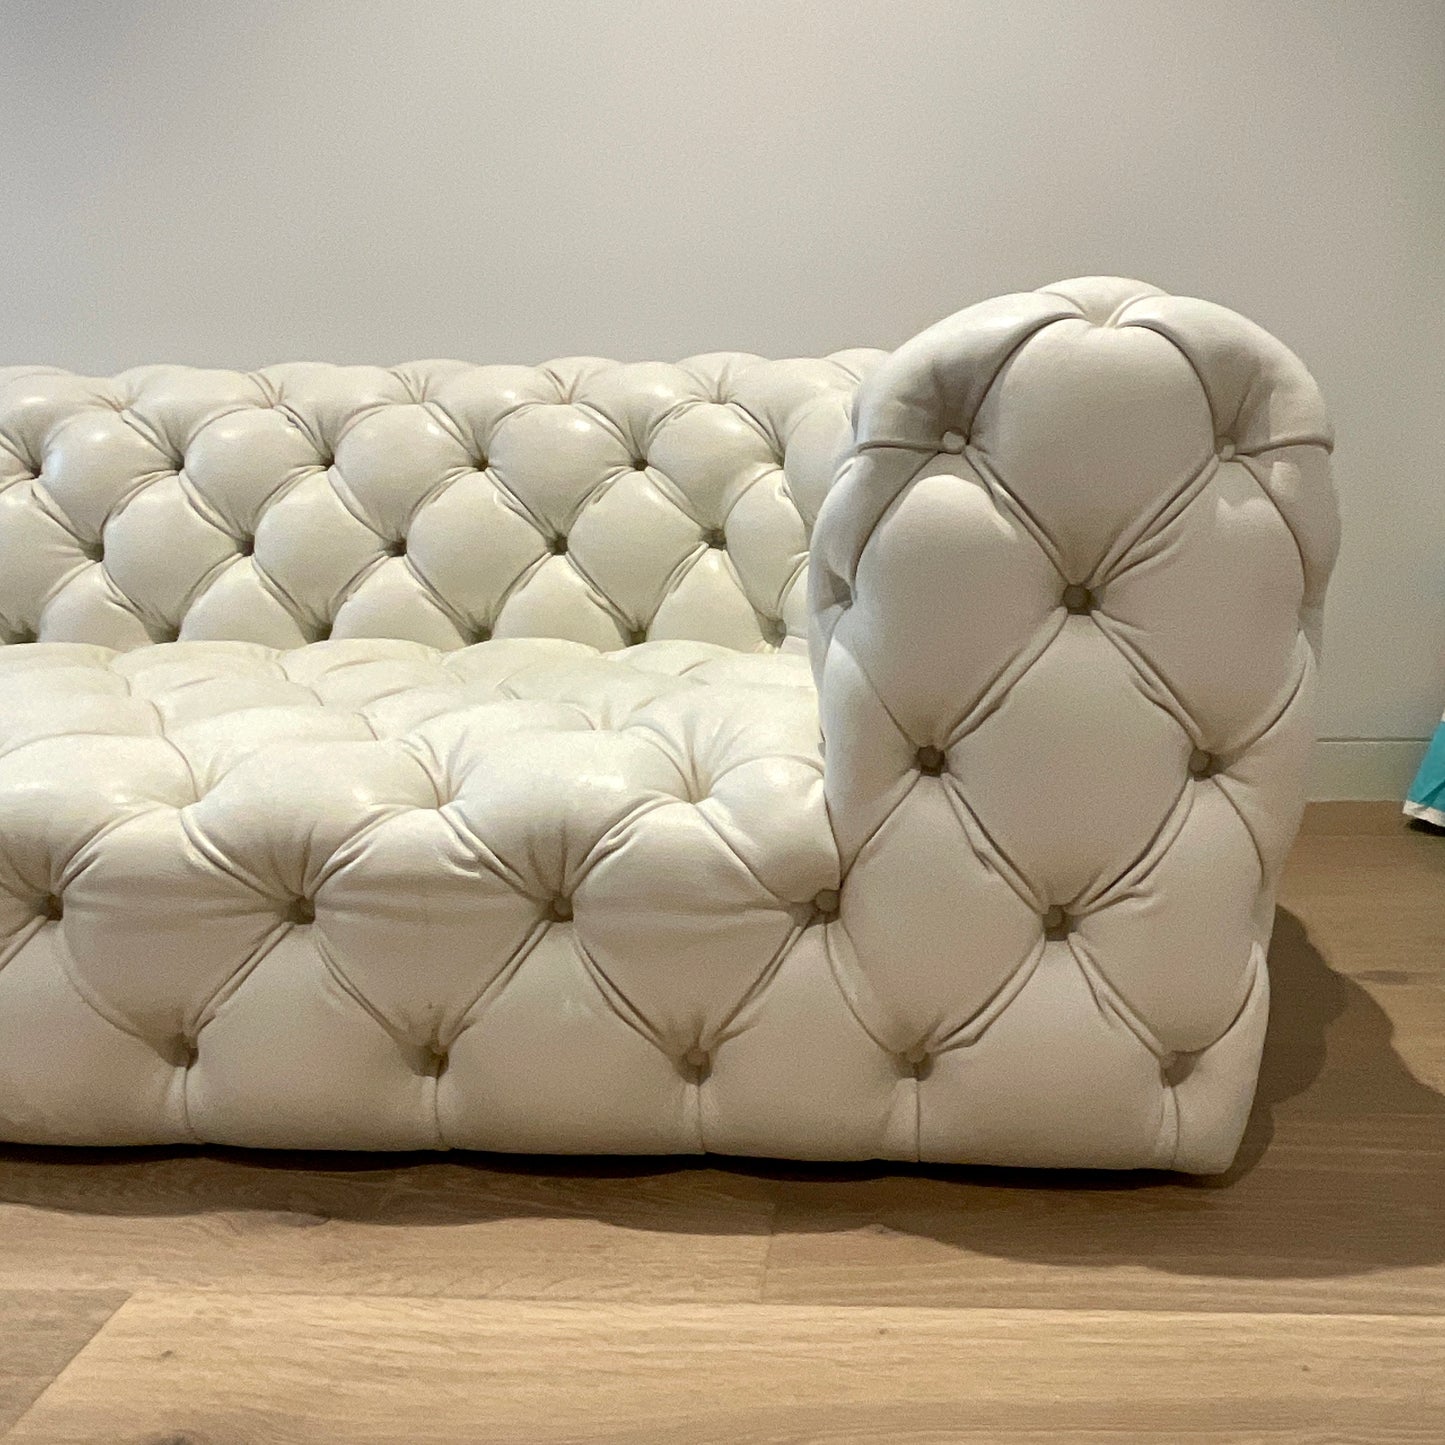 Chester Moon Sofa by Paola Navone for Baxter